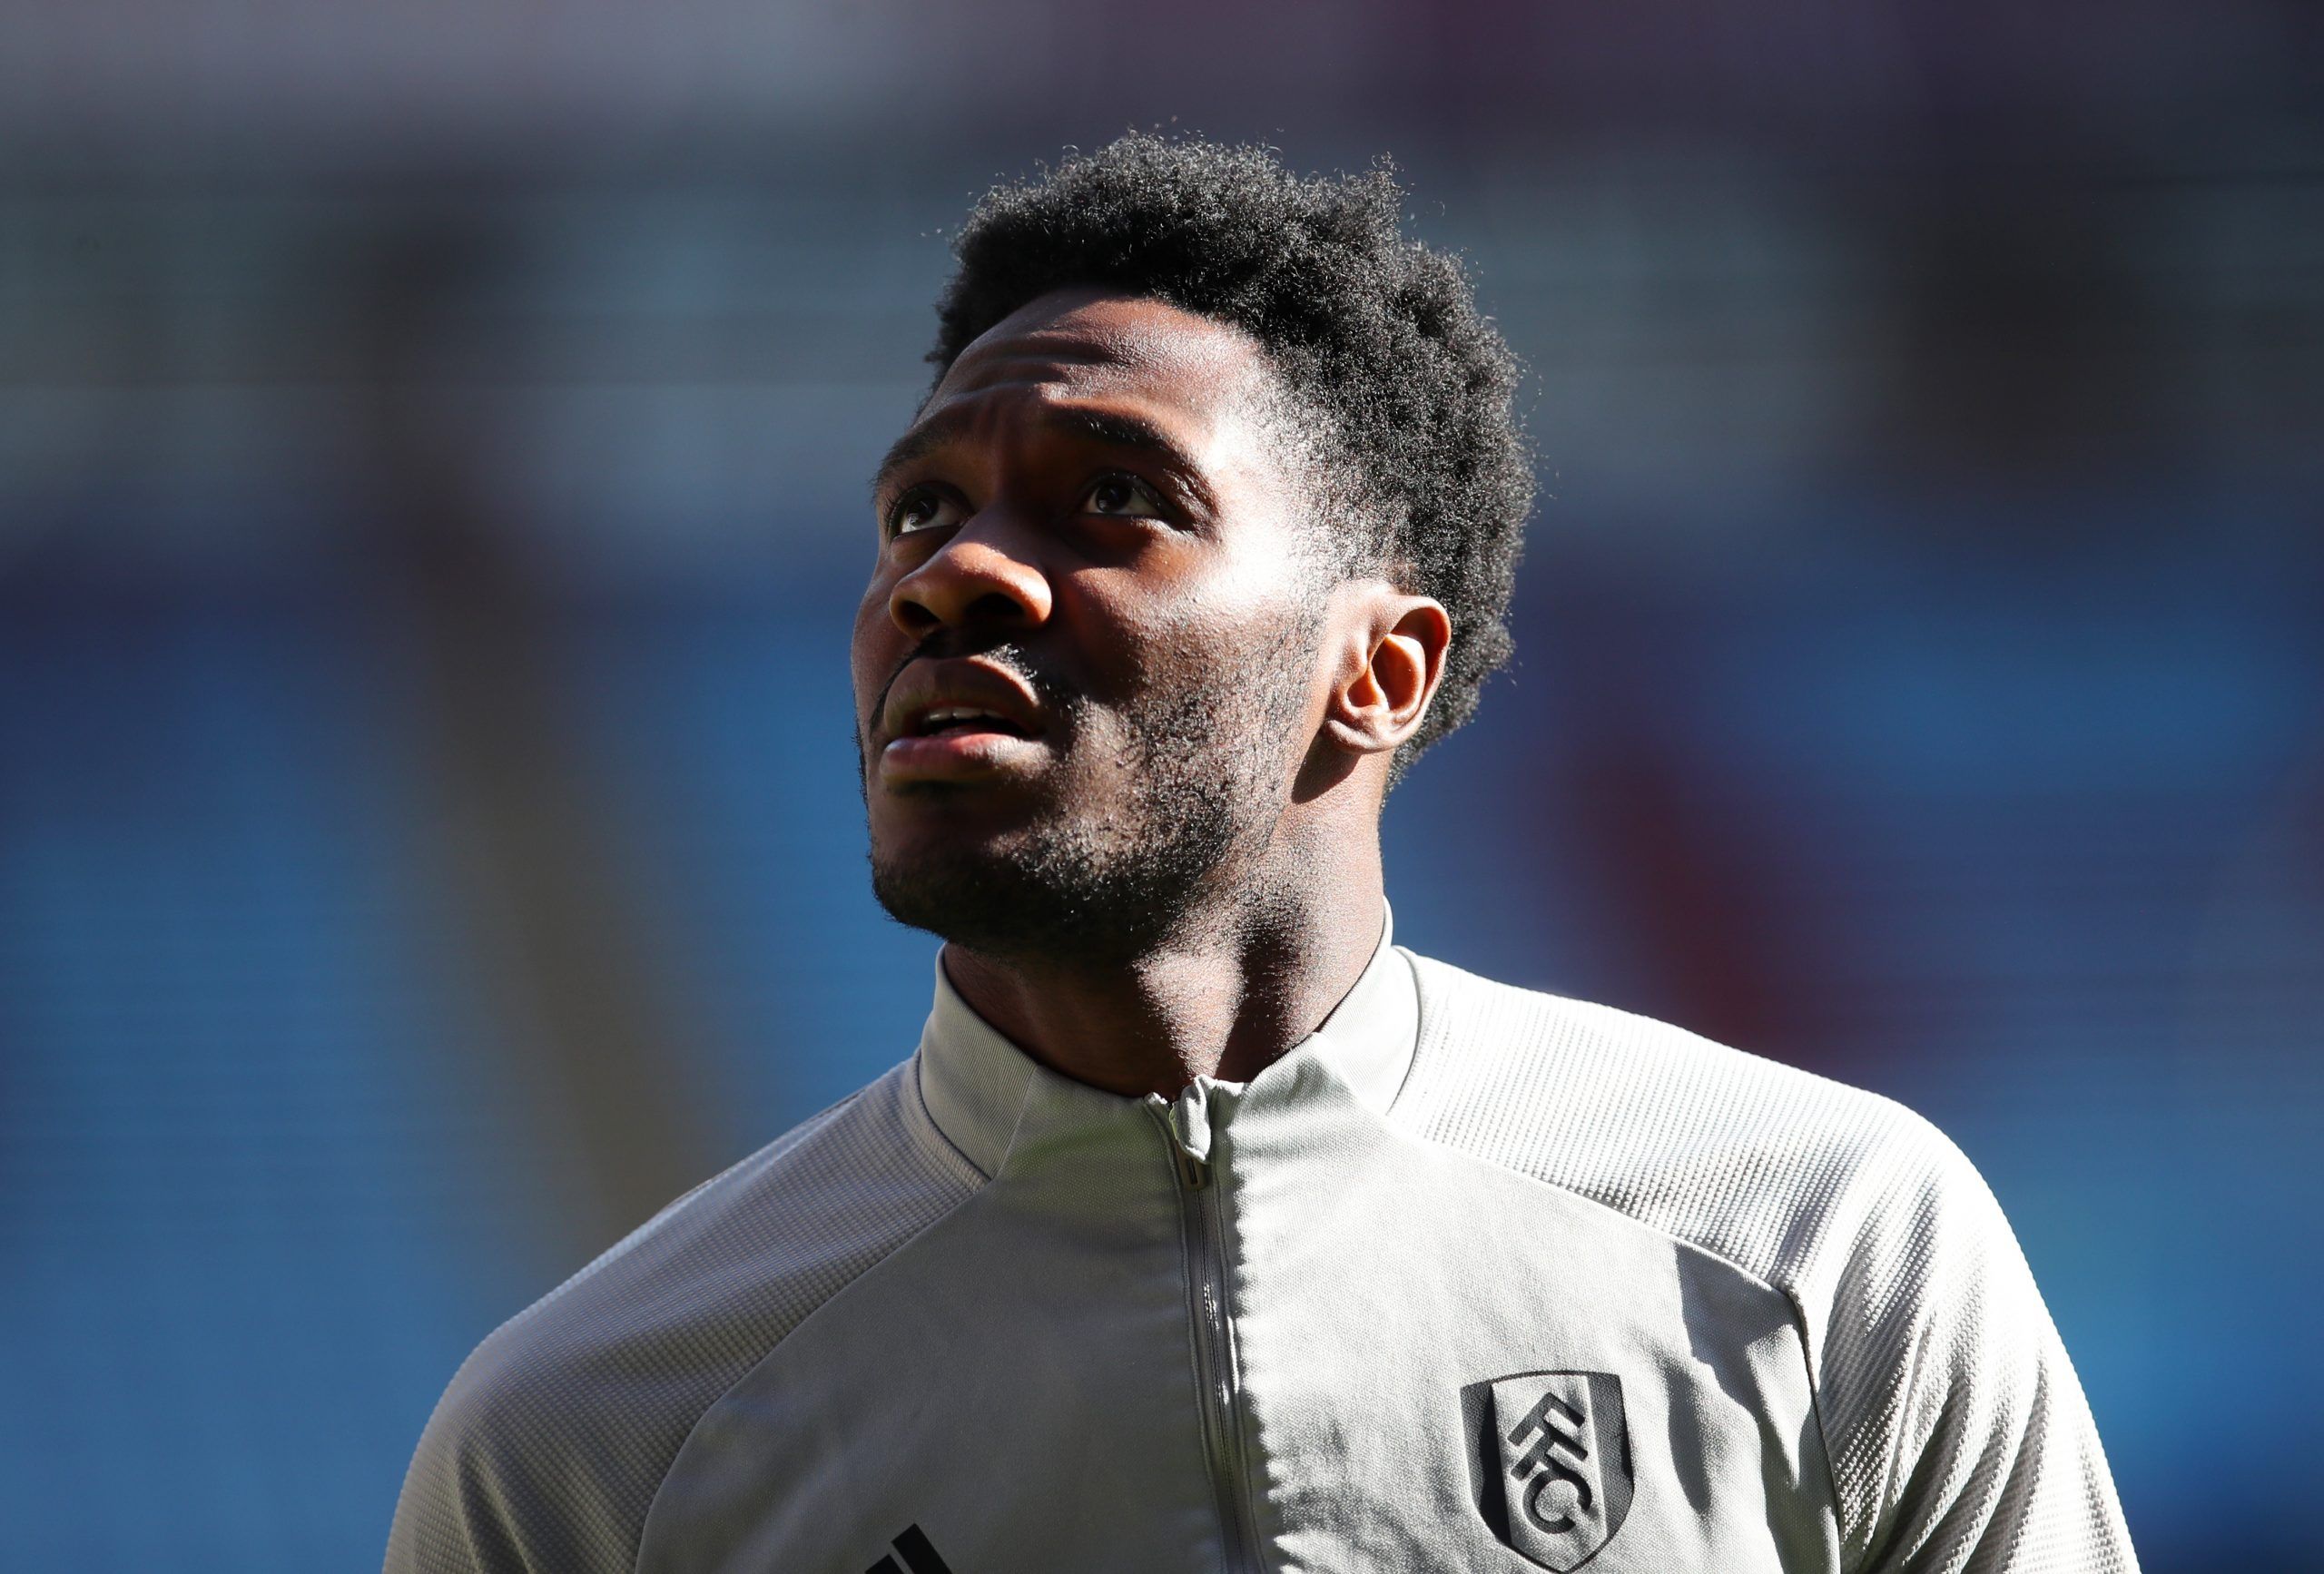 OLA-AINA-FULHAM-PREMIER-LEAGUE-CRYSTAL-PALACE-VIEIRA-TRANSFER-LATEST-MITCHELL-WARDSoccer Football - Premier League - Aston Villa v Fulham - Villa Park, Birmingham, Britain - April 4, 2021 Fulham's Ola Aina during the warm up before the match Pool via REUTERS/Catherine Ivill EDITORIAL USE ONLY. No use with unauthorized audio, video, data, fixture lists, club/league logos or 'live' services. Online in-match use limited to 75 images, no video emulation. No use in betting, games or single club /leag